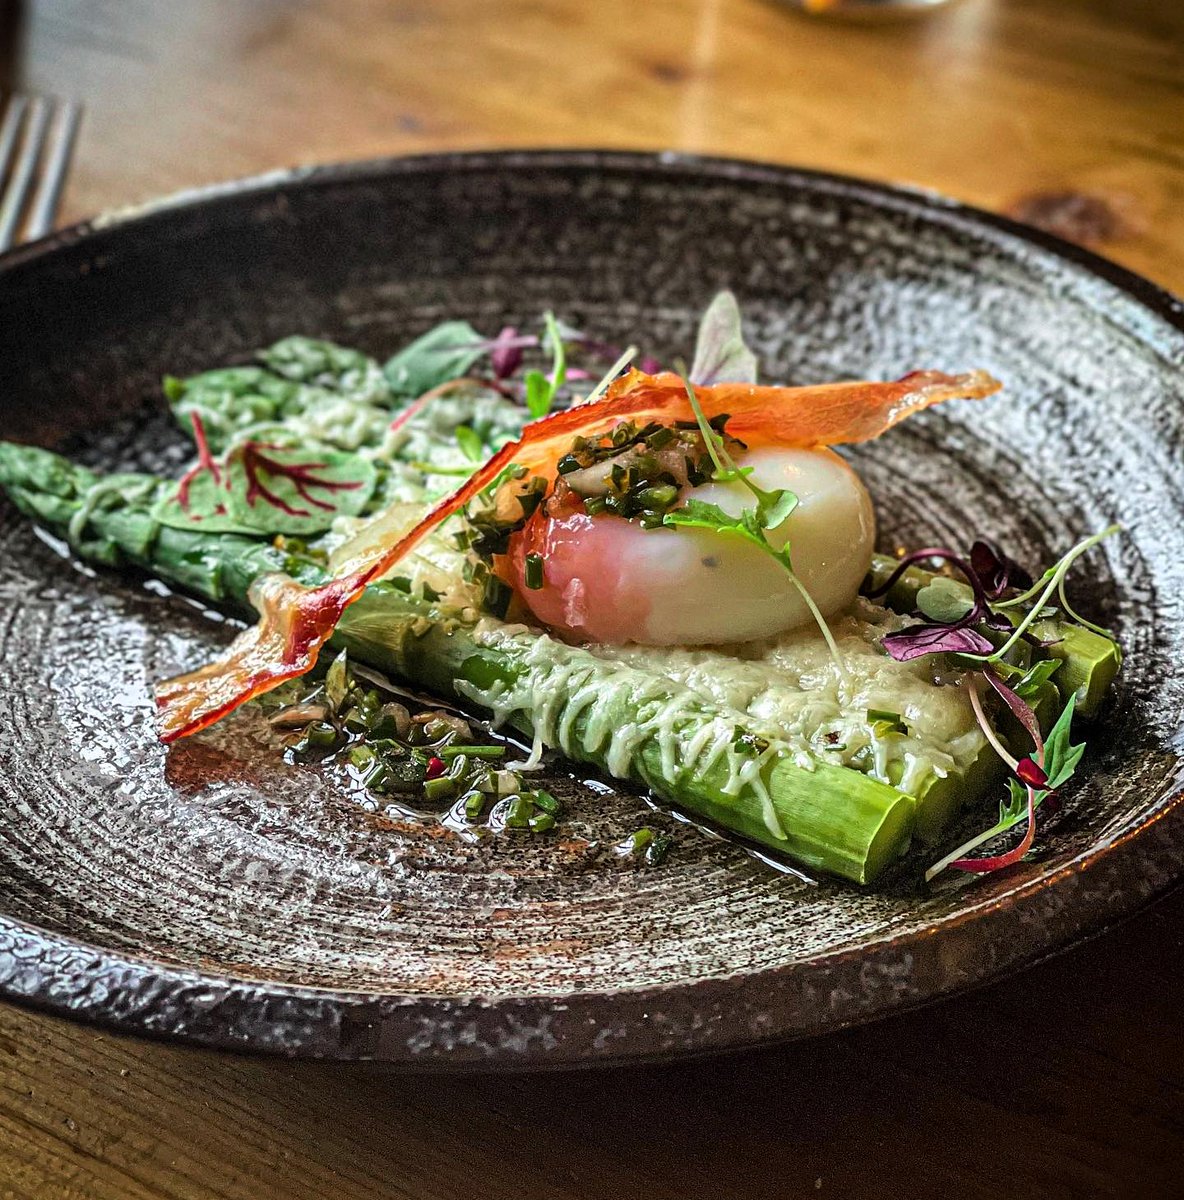 #new #starter Grilled Asparagus, 63oC Poached Egg, Pancetta, Chimichurri 😍 Availability Saturday evening this week if you'd like to give some of our new dishes a try call @whitepheasant team on 01638 720414 ☺️ . Thanks to #cambridgefoodies @cambridgefoodiessocial for the photo🙏